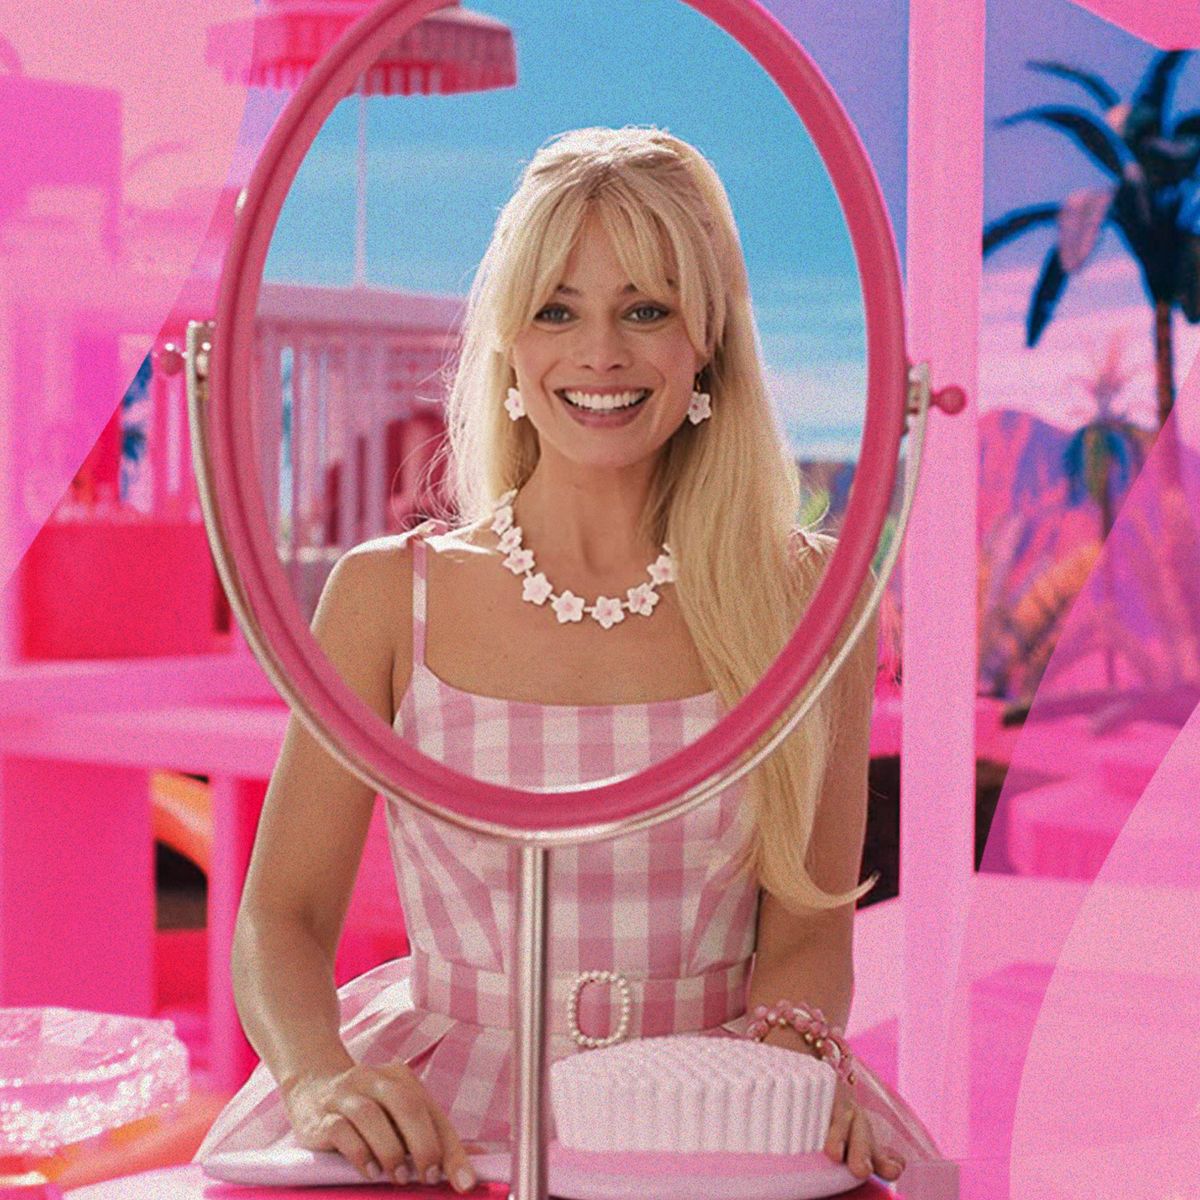 Margot Robbie as Barbie, seen sitting at a pink vanity wearing a pink checked dress and smiling.